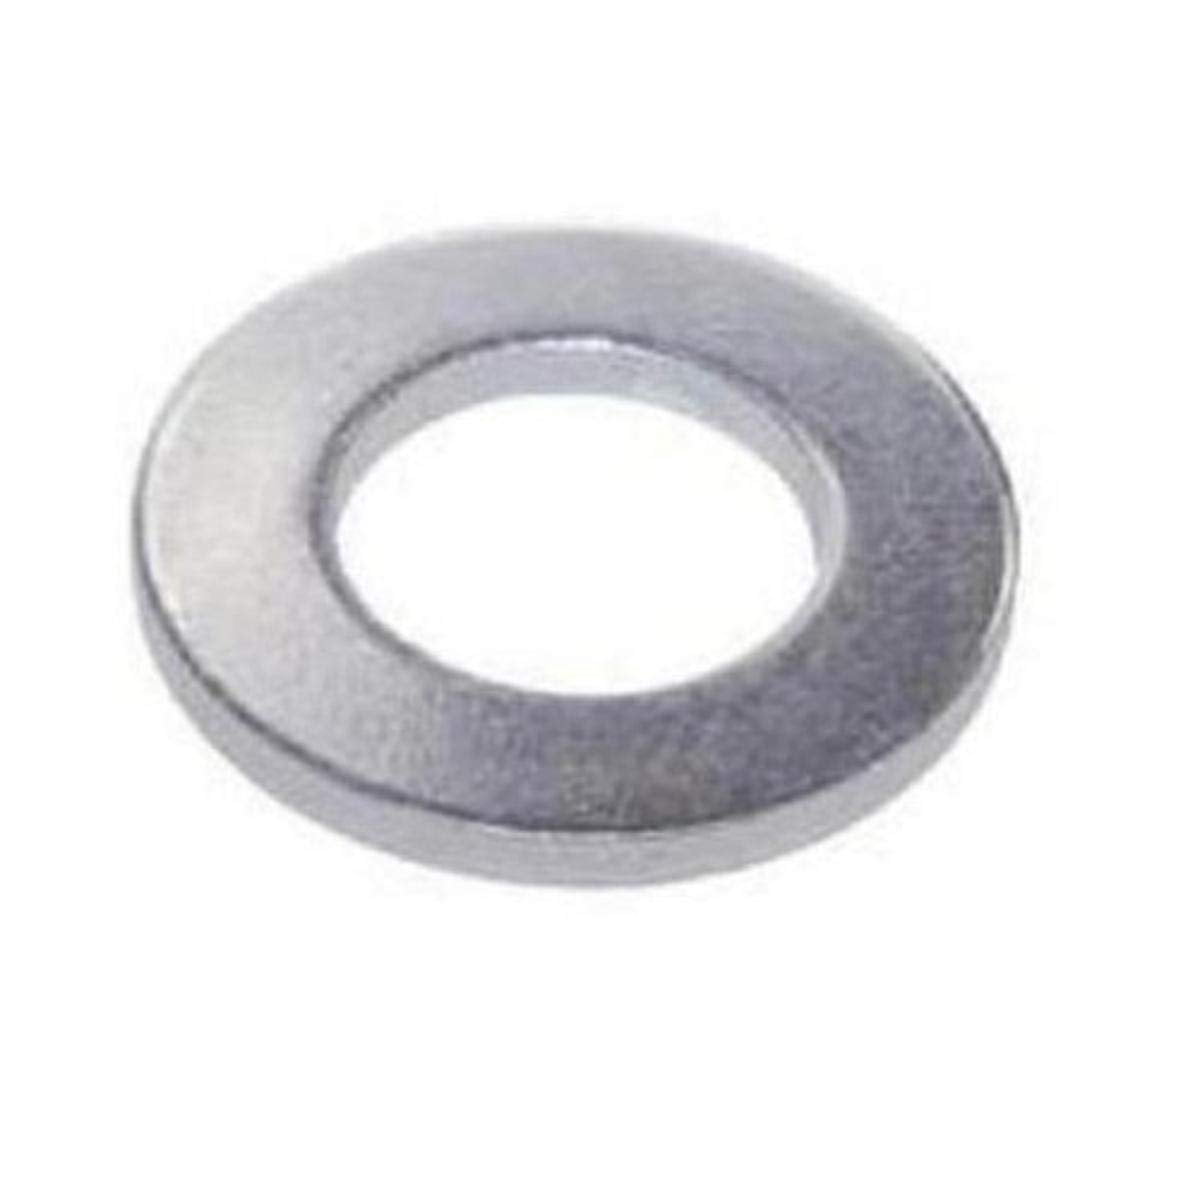 Pack of 10 ALUMINUM CONICAL WASHER 1-1/4 OD x 5/16" ID 